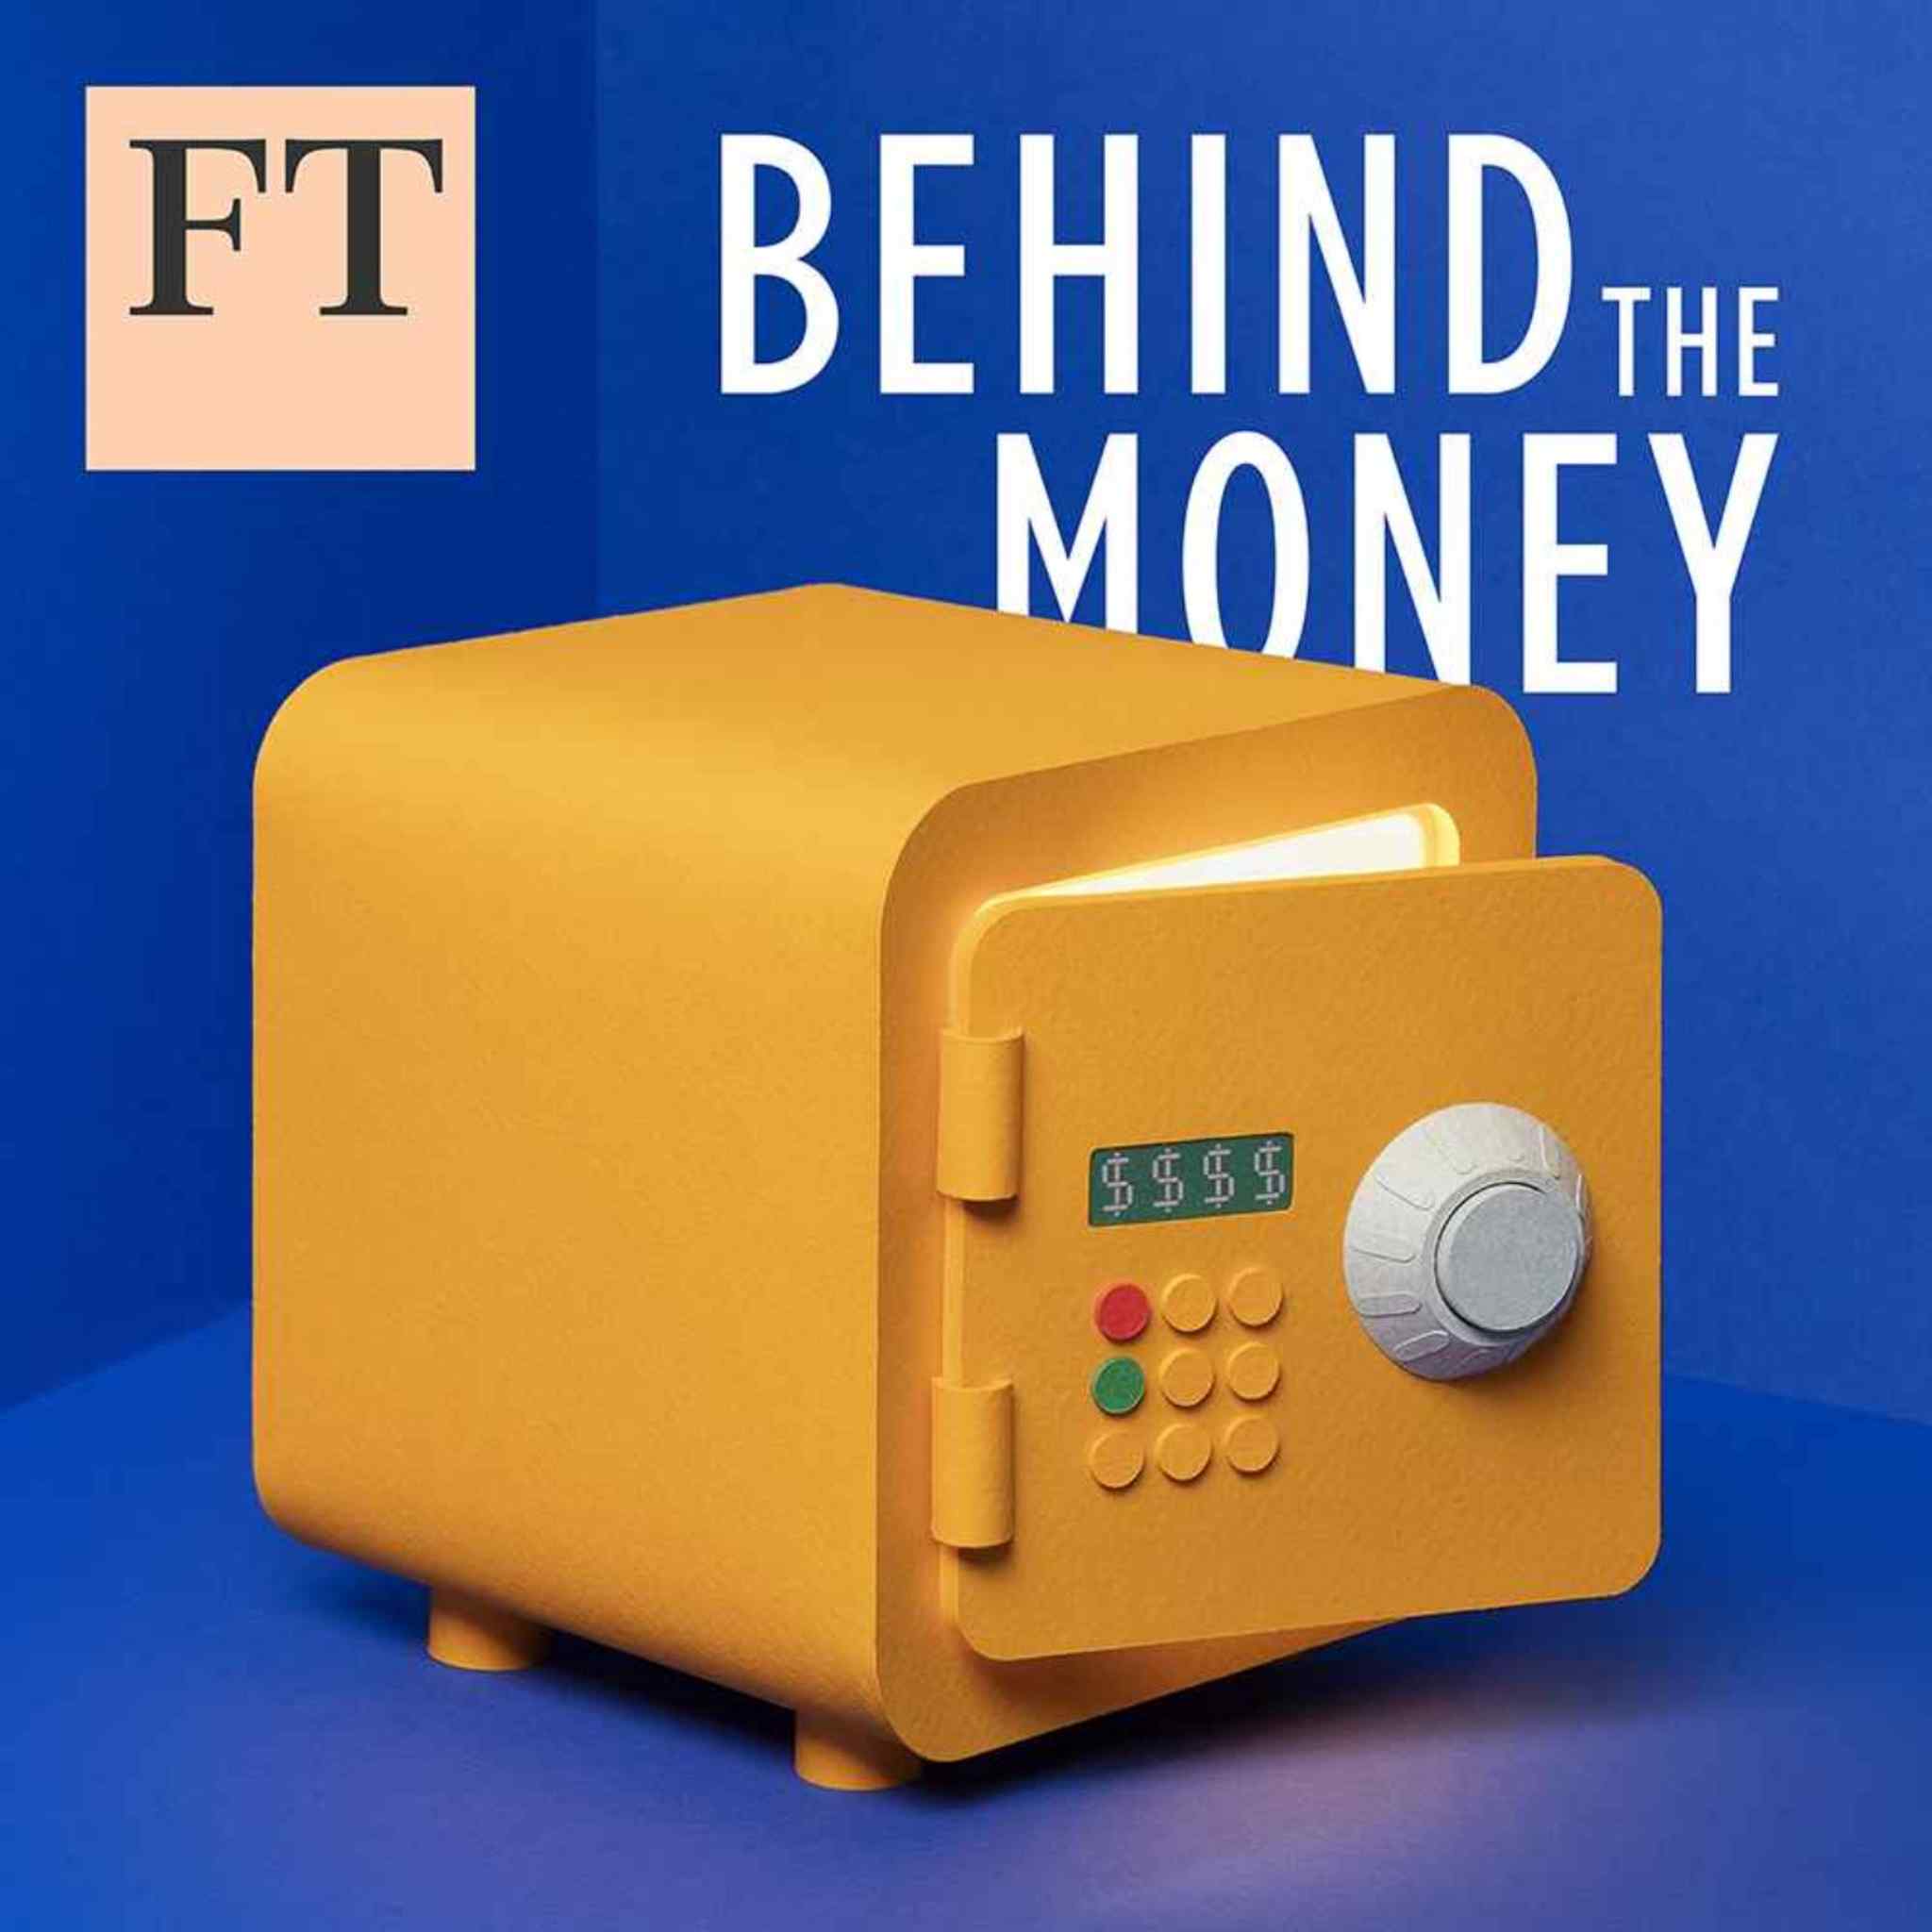 Behind the Money podcast